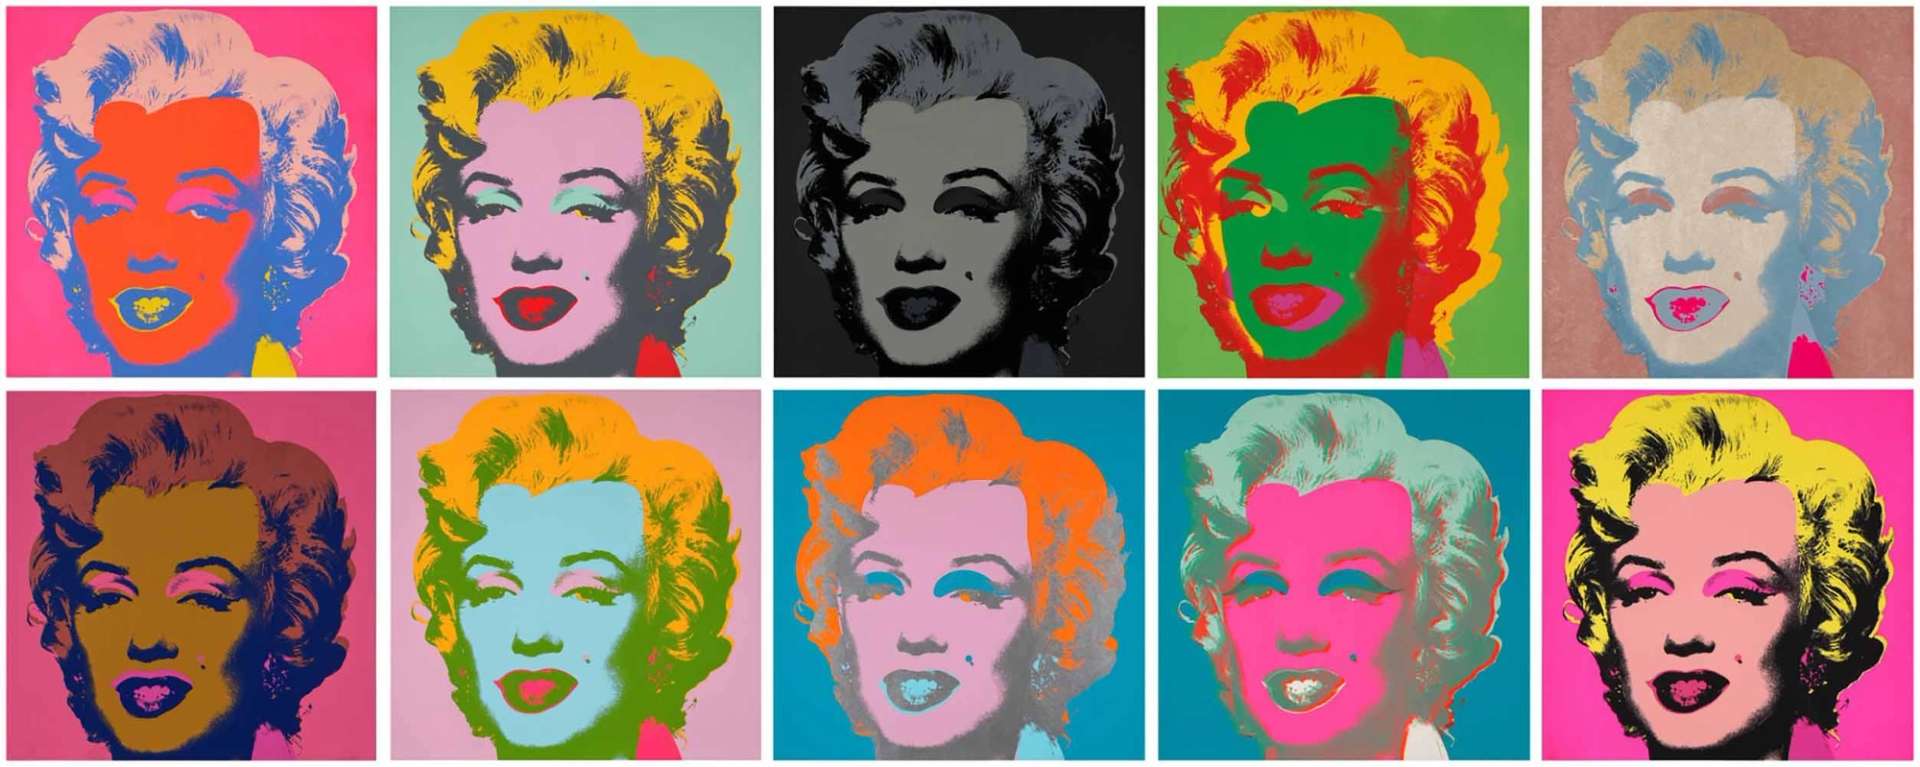 A pop art painting titled "Marilyn Monroe" by Andy Warhol, featuring a repeated image of the famous actress in bright, bold colours.